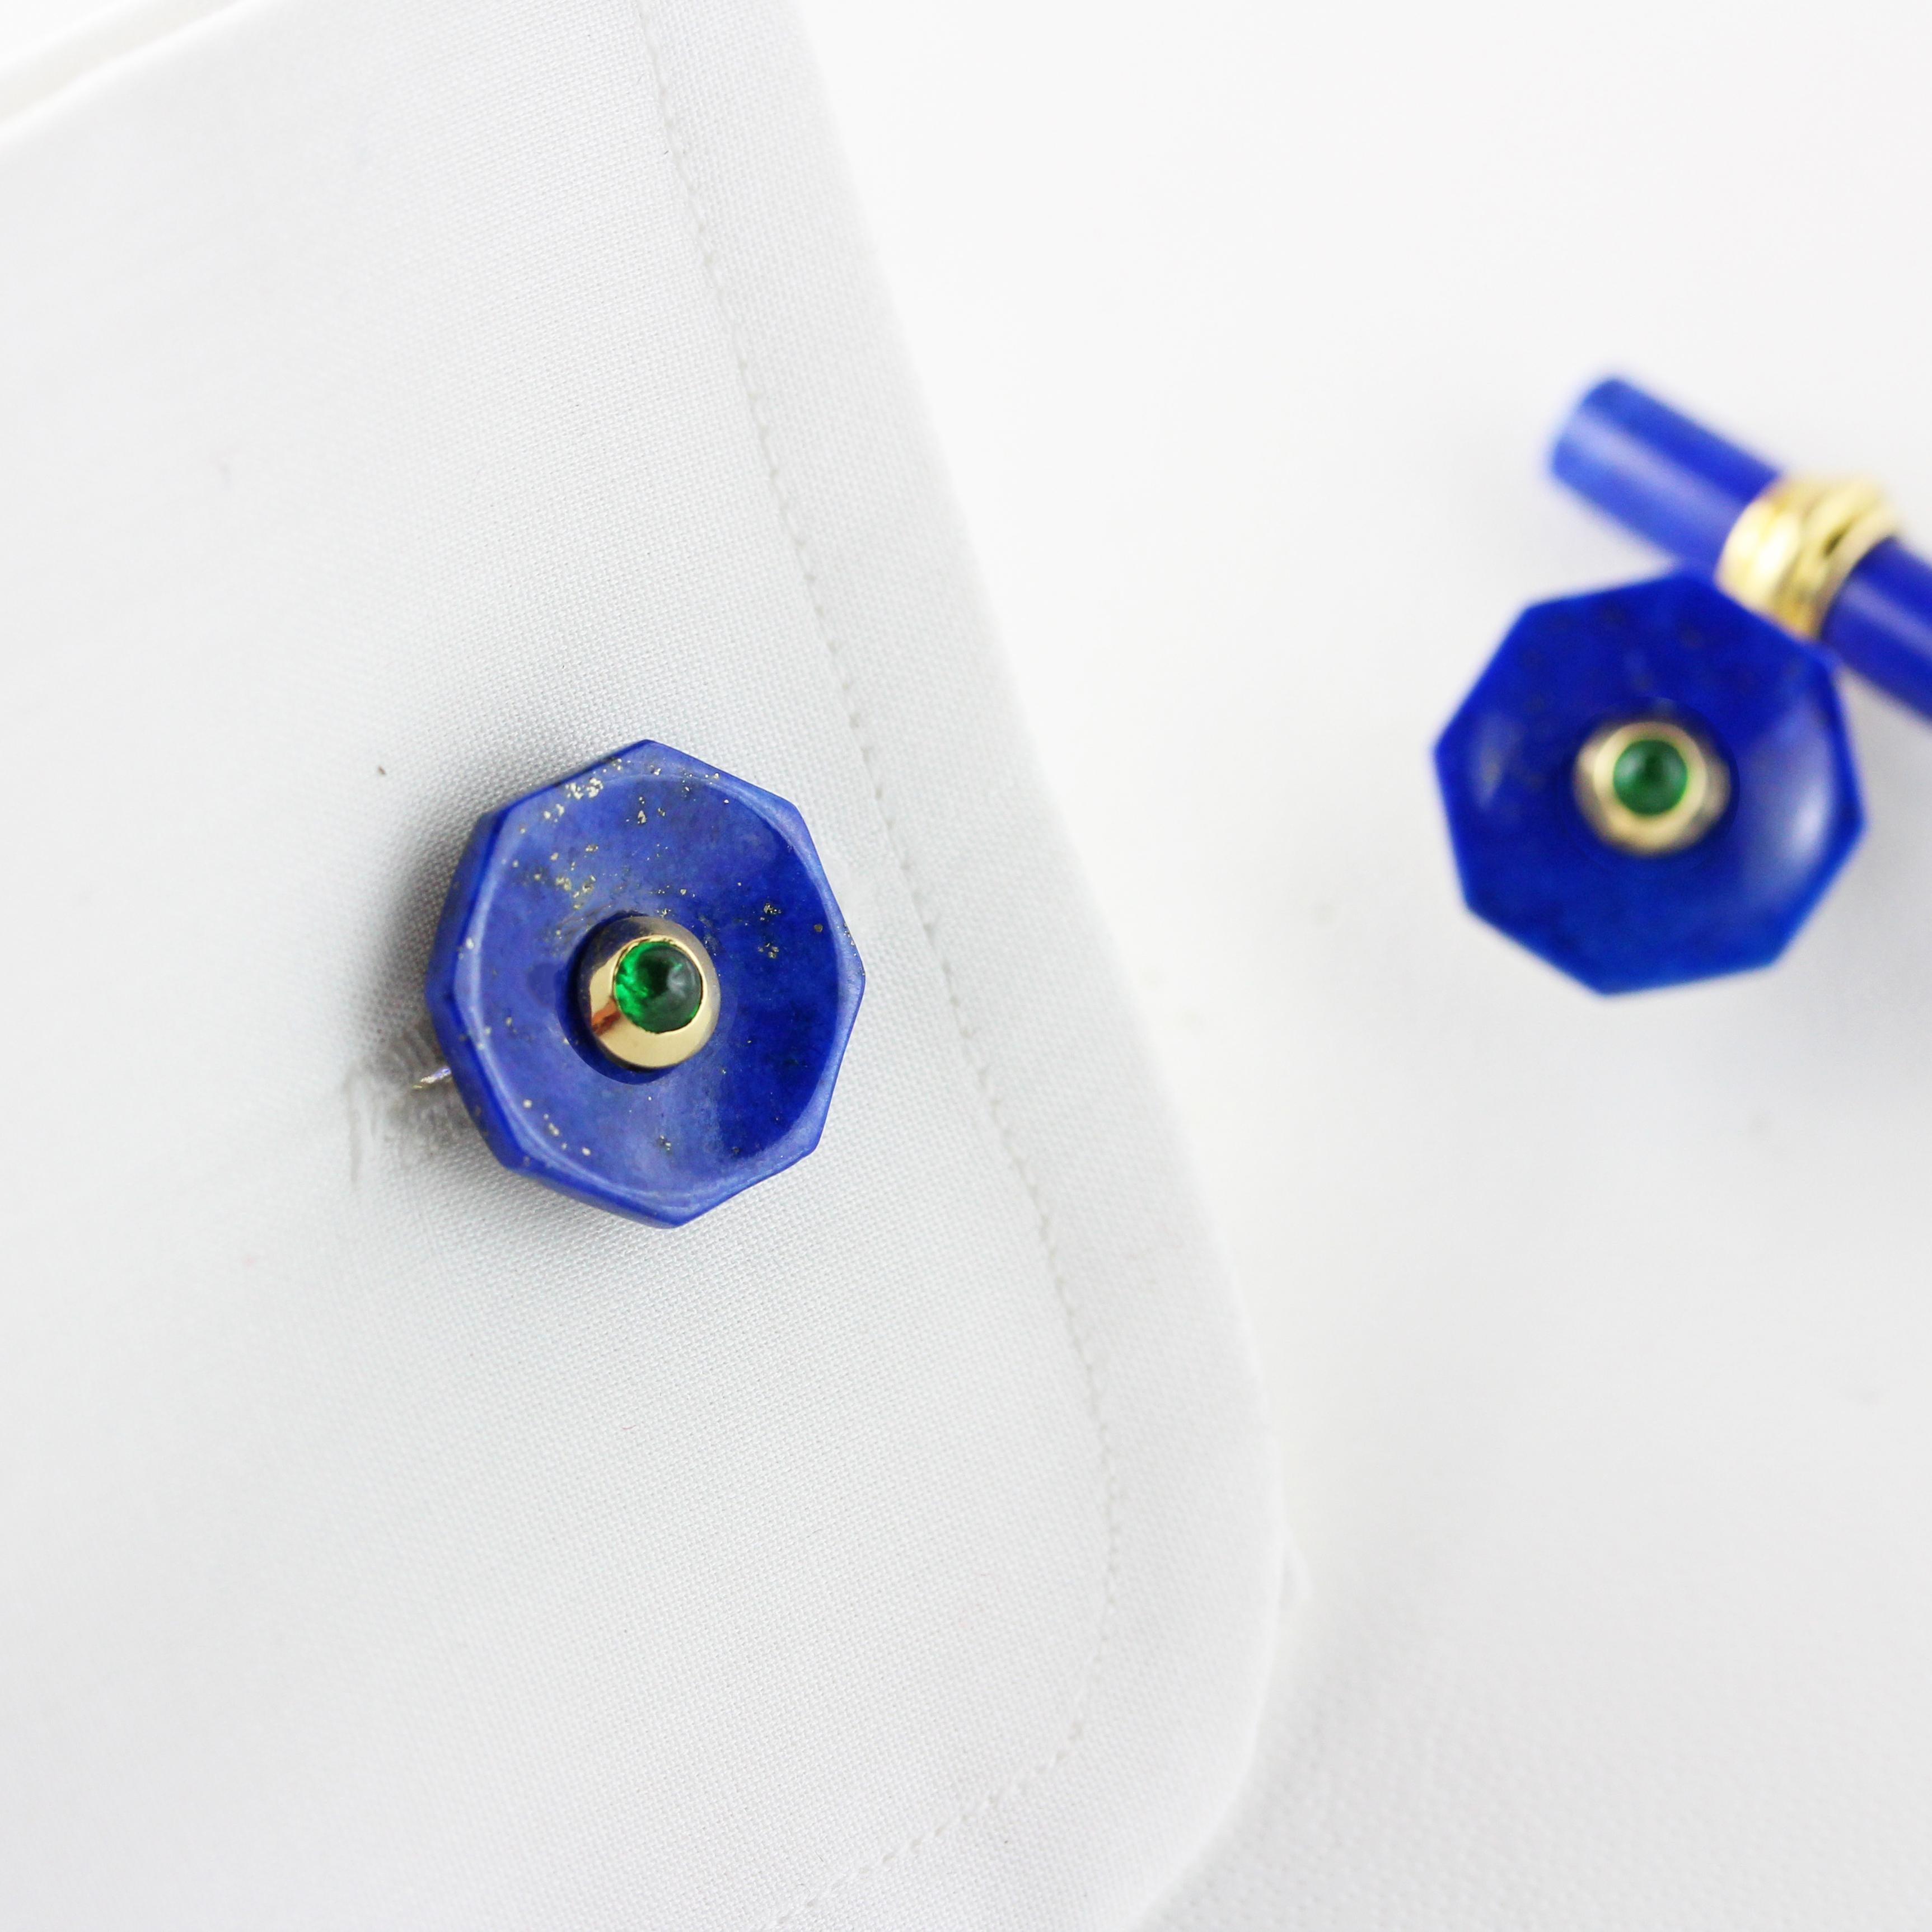 This elegant pair of cufflinks made in lapis lazuli  features a cylindrical toggle and a front face shaped as an octagon with a convex, multifaceted surface and a central ornament made of a emerald cabochon. 
The post linking front face and toggle